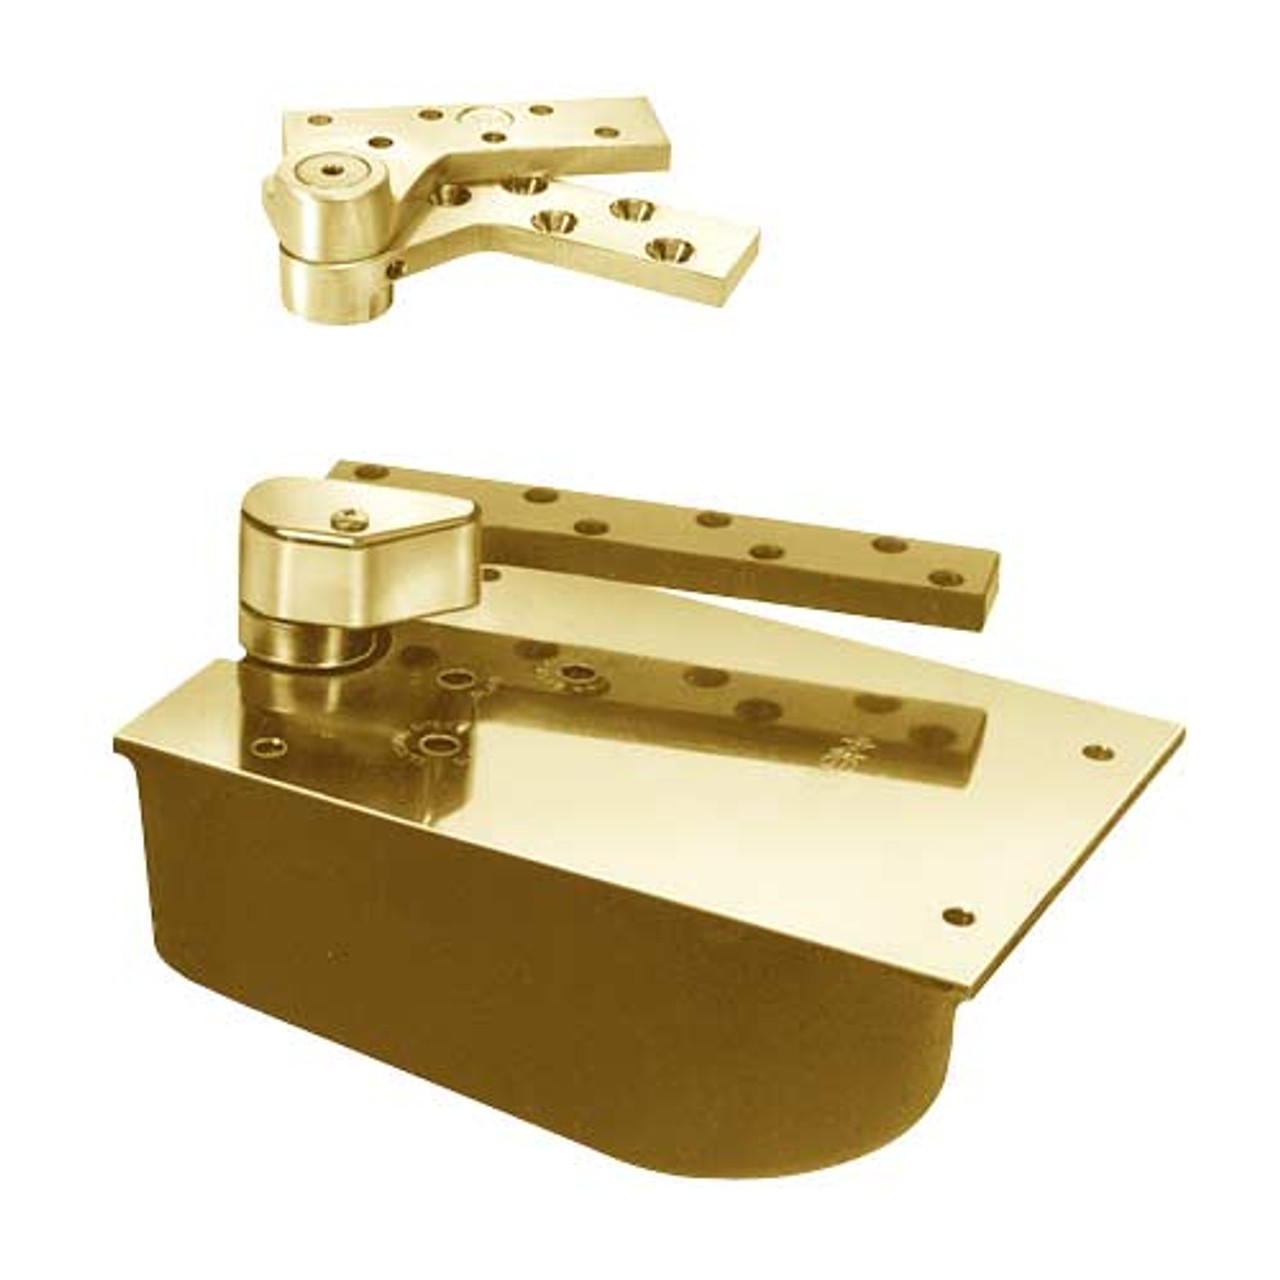 SCL27-105N-LH-605 Rixson 27 Series Extra Heavy Duty Lead Lined Offset Floor Closer in Bright Brass Finish